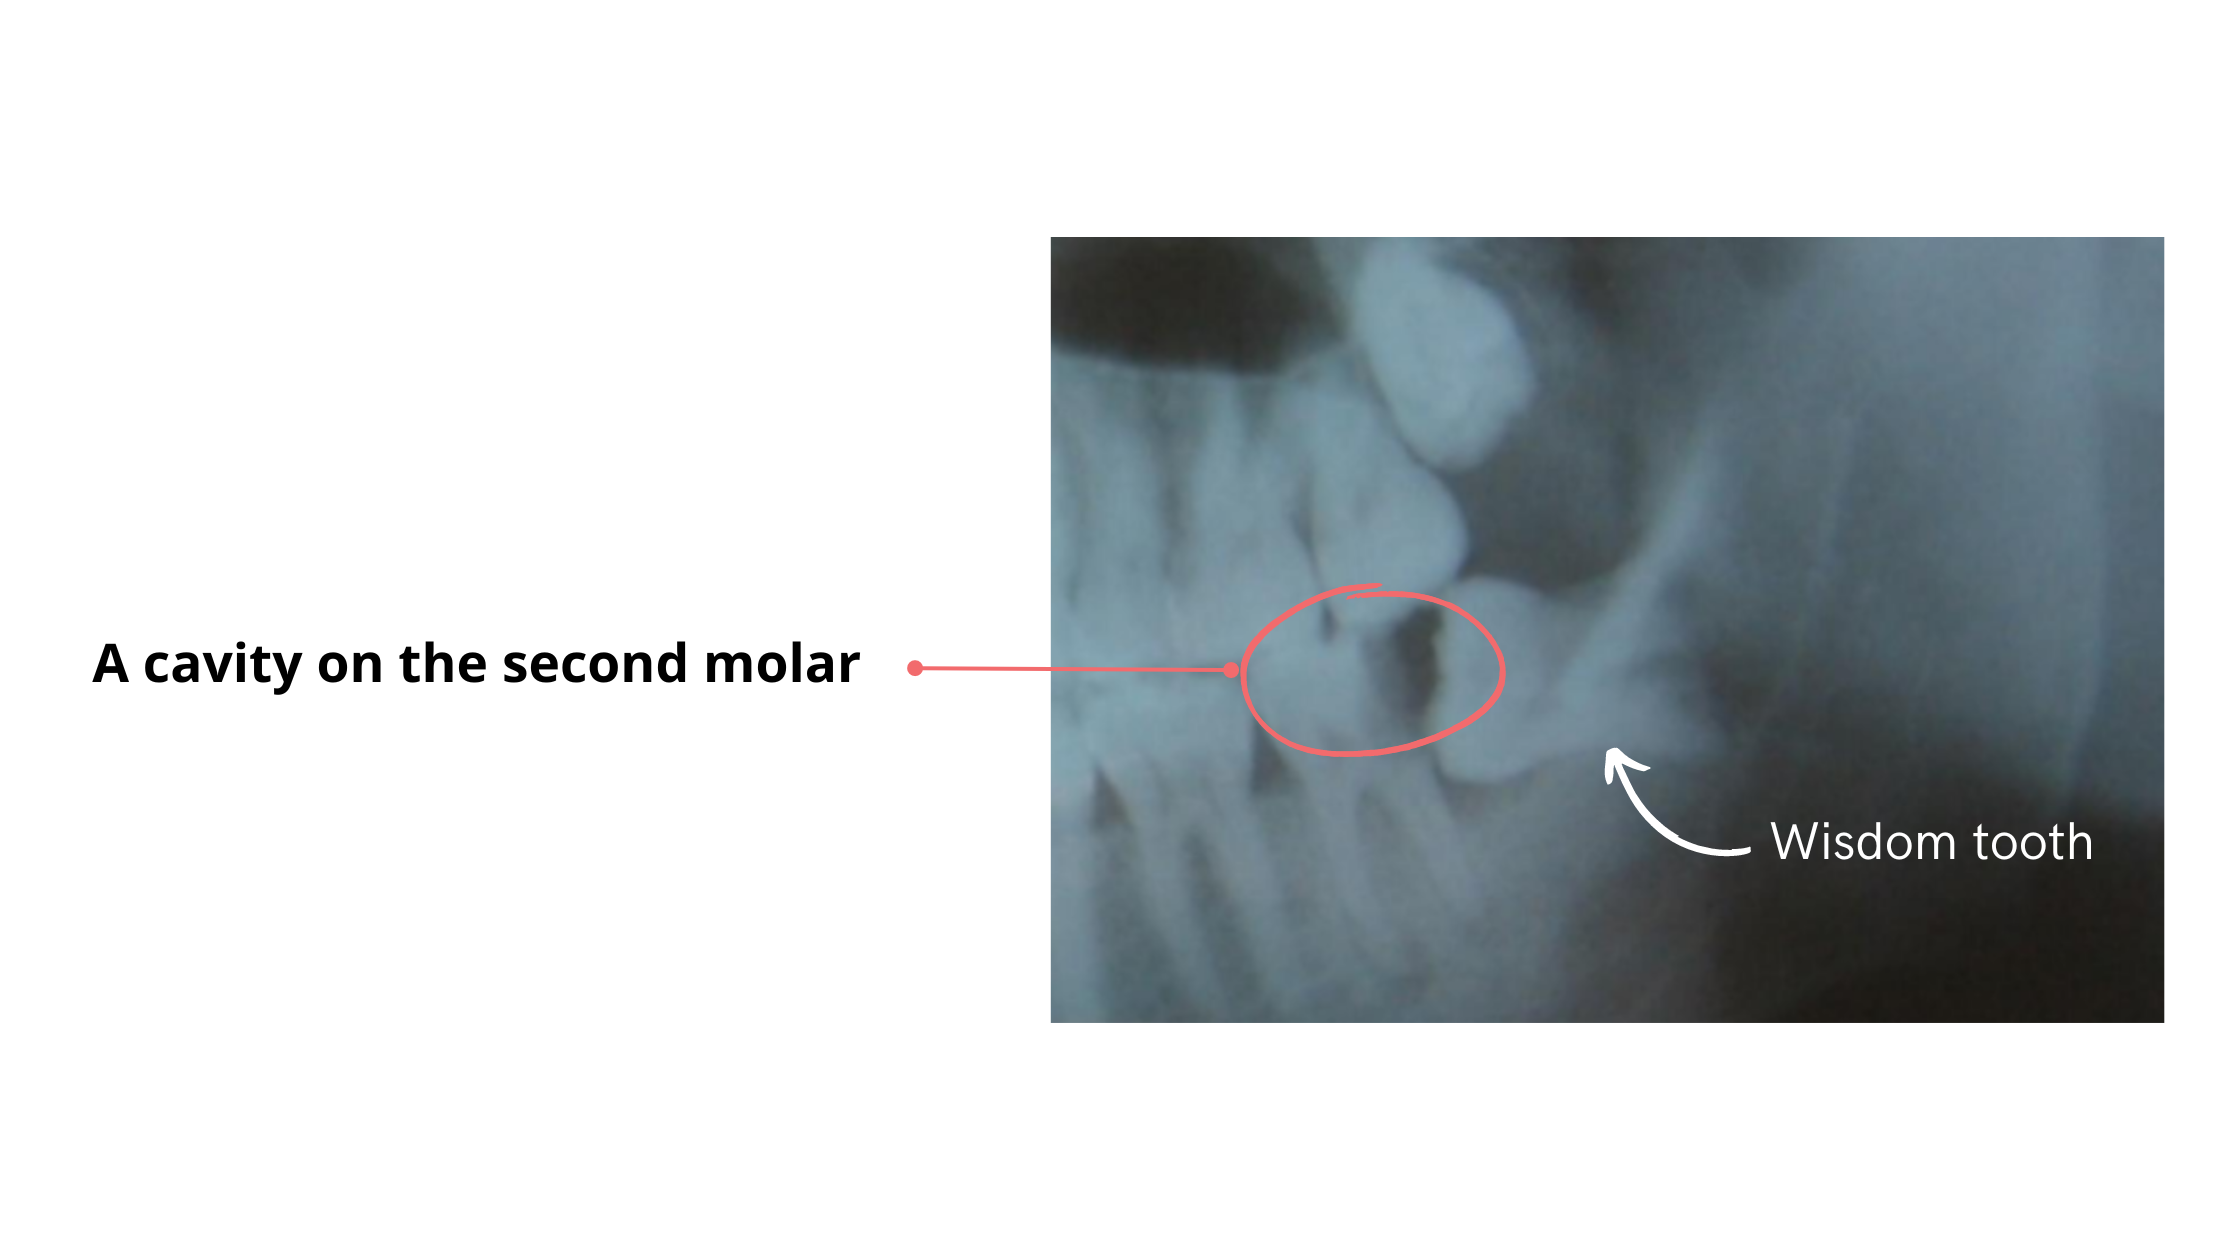 Dental X-ray showing a partially erupted wisdom tooth causing decay on the neighboring molar